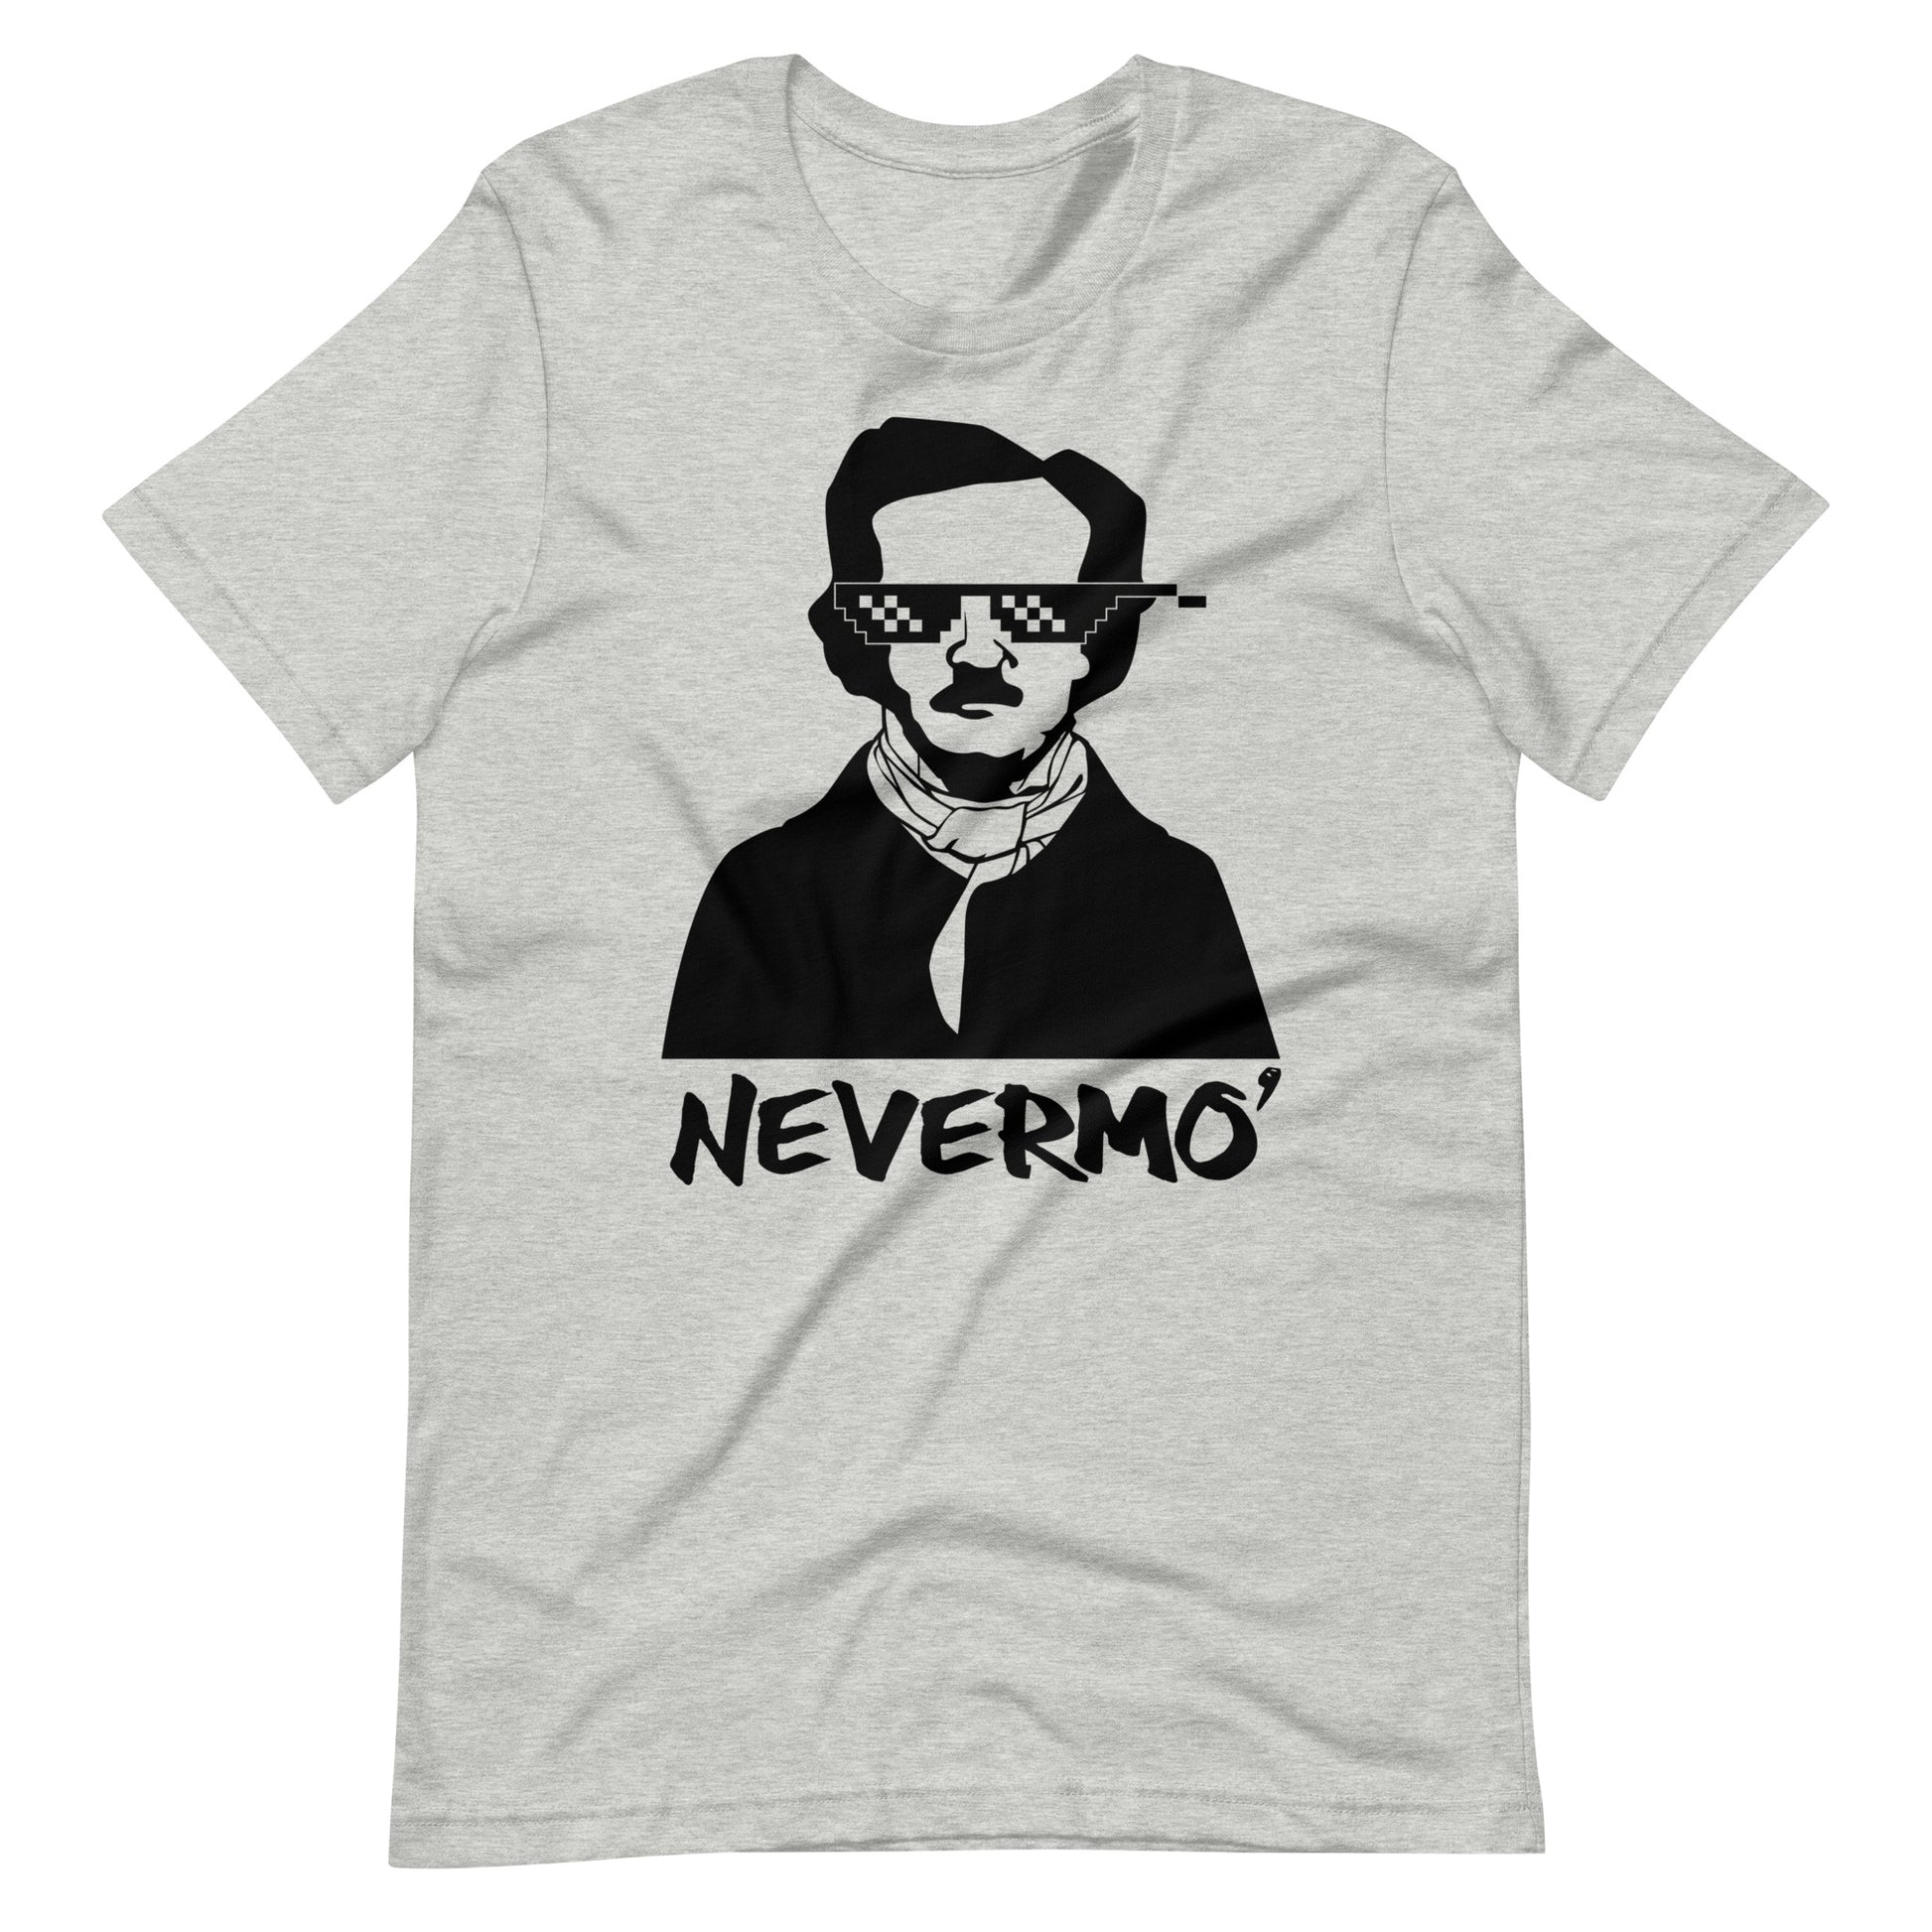 Men's Edgar Allan Poe "The Nevermo" T-Shirt - Athletic Heather Front